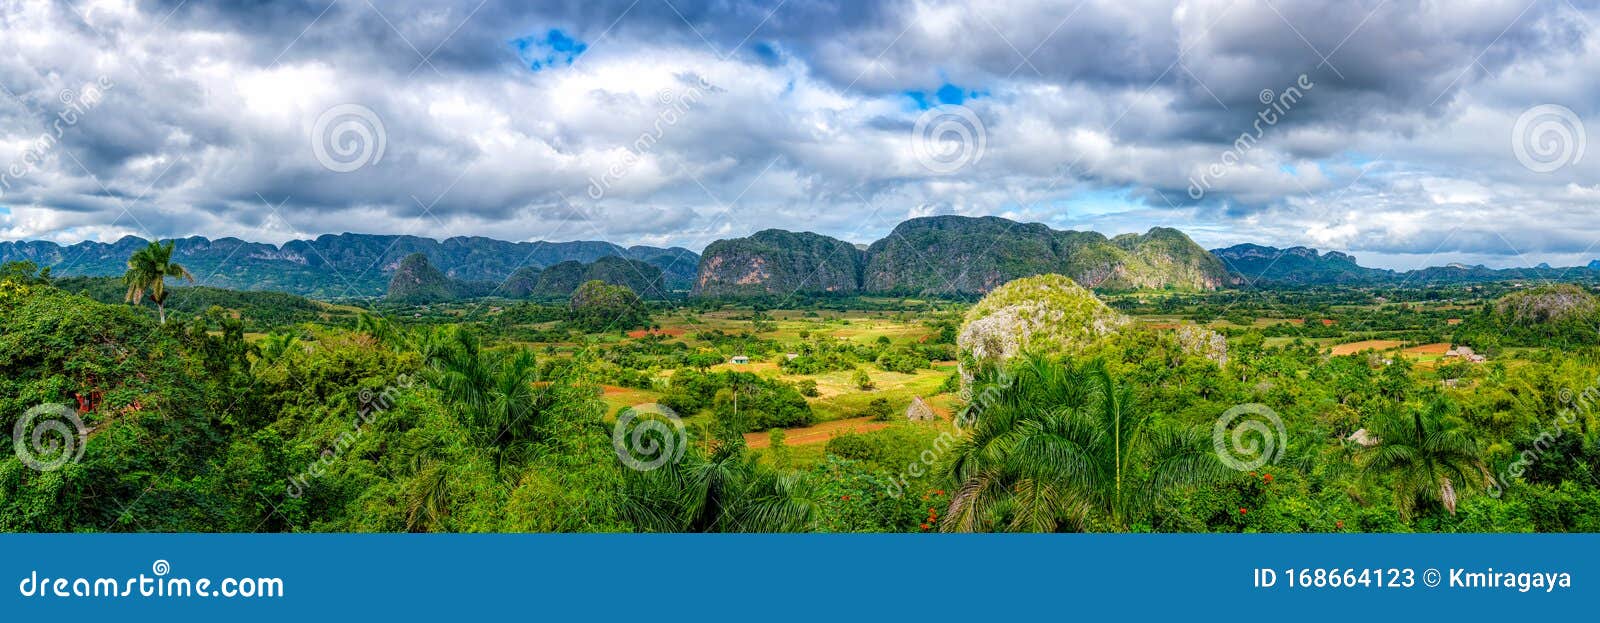 panoramic view of the viÃÂ±ales valley in cuba